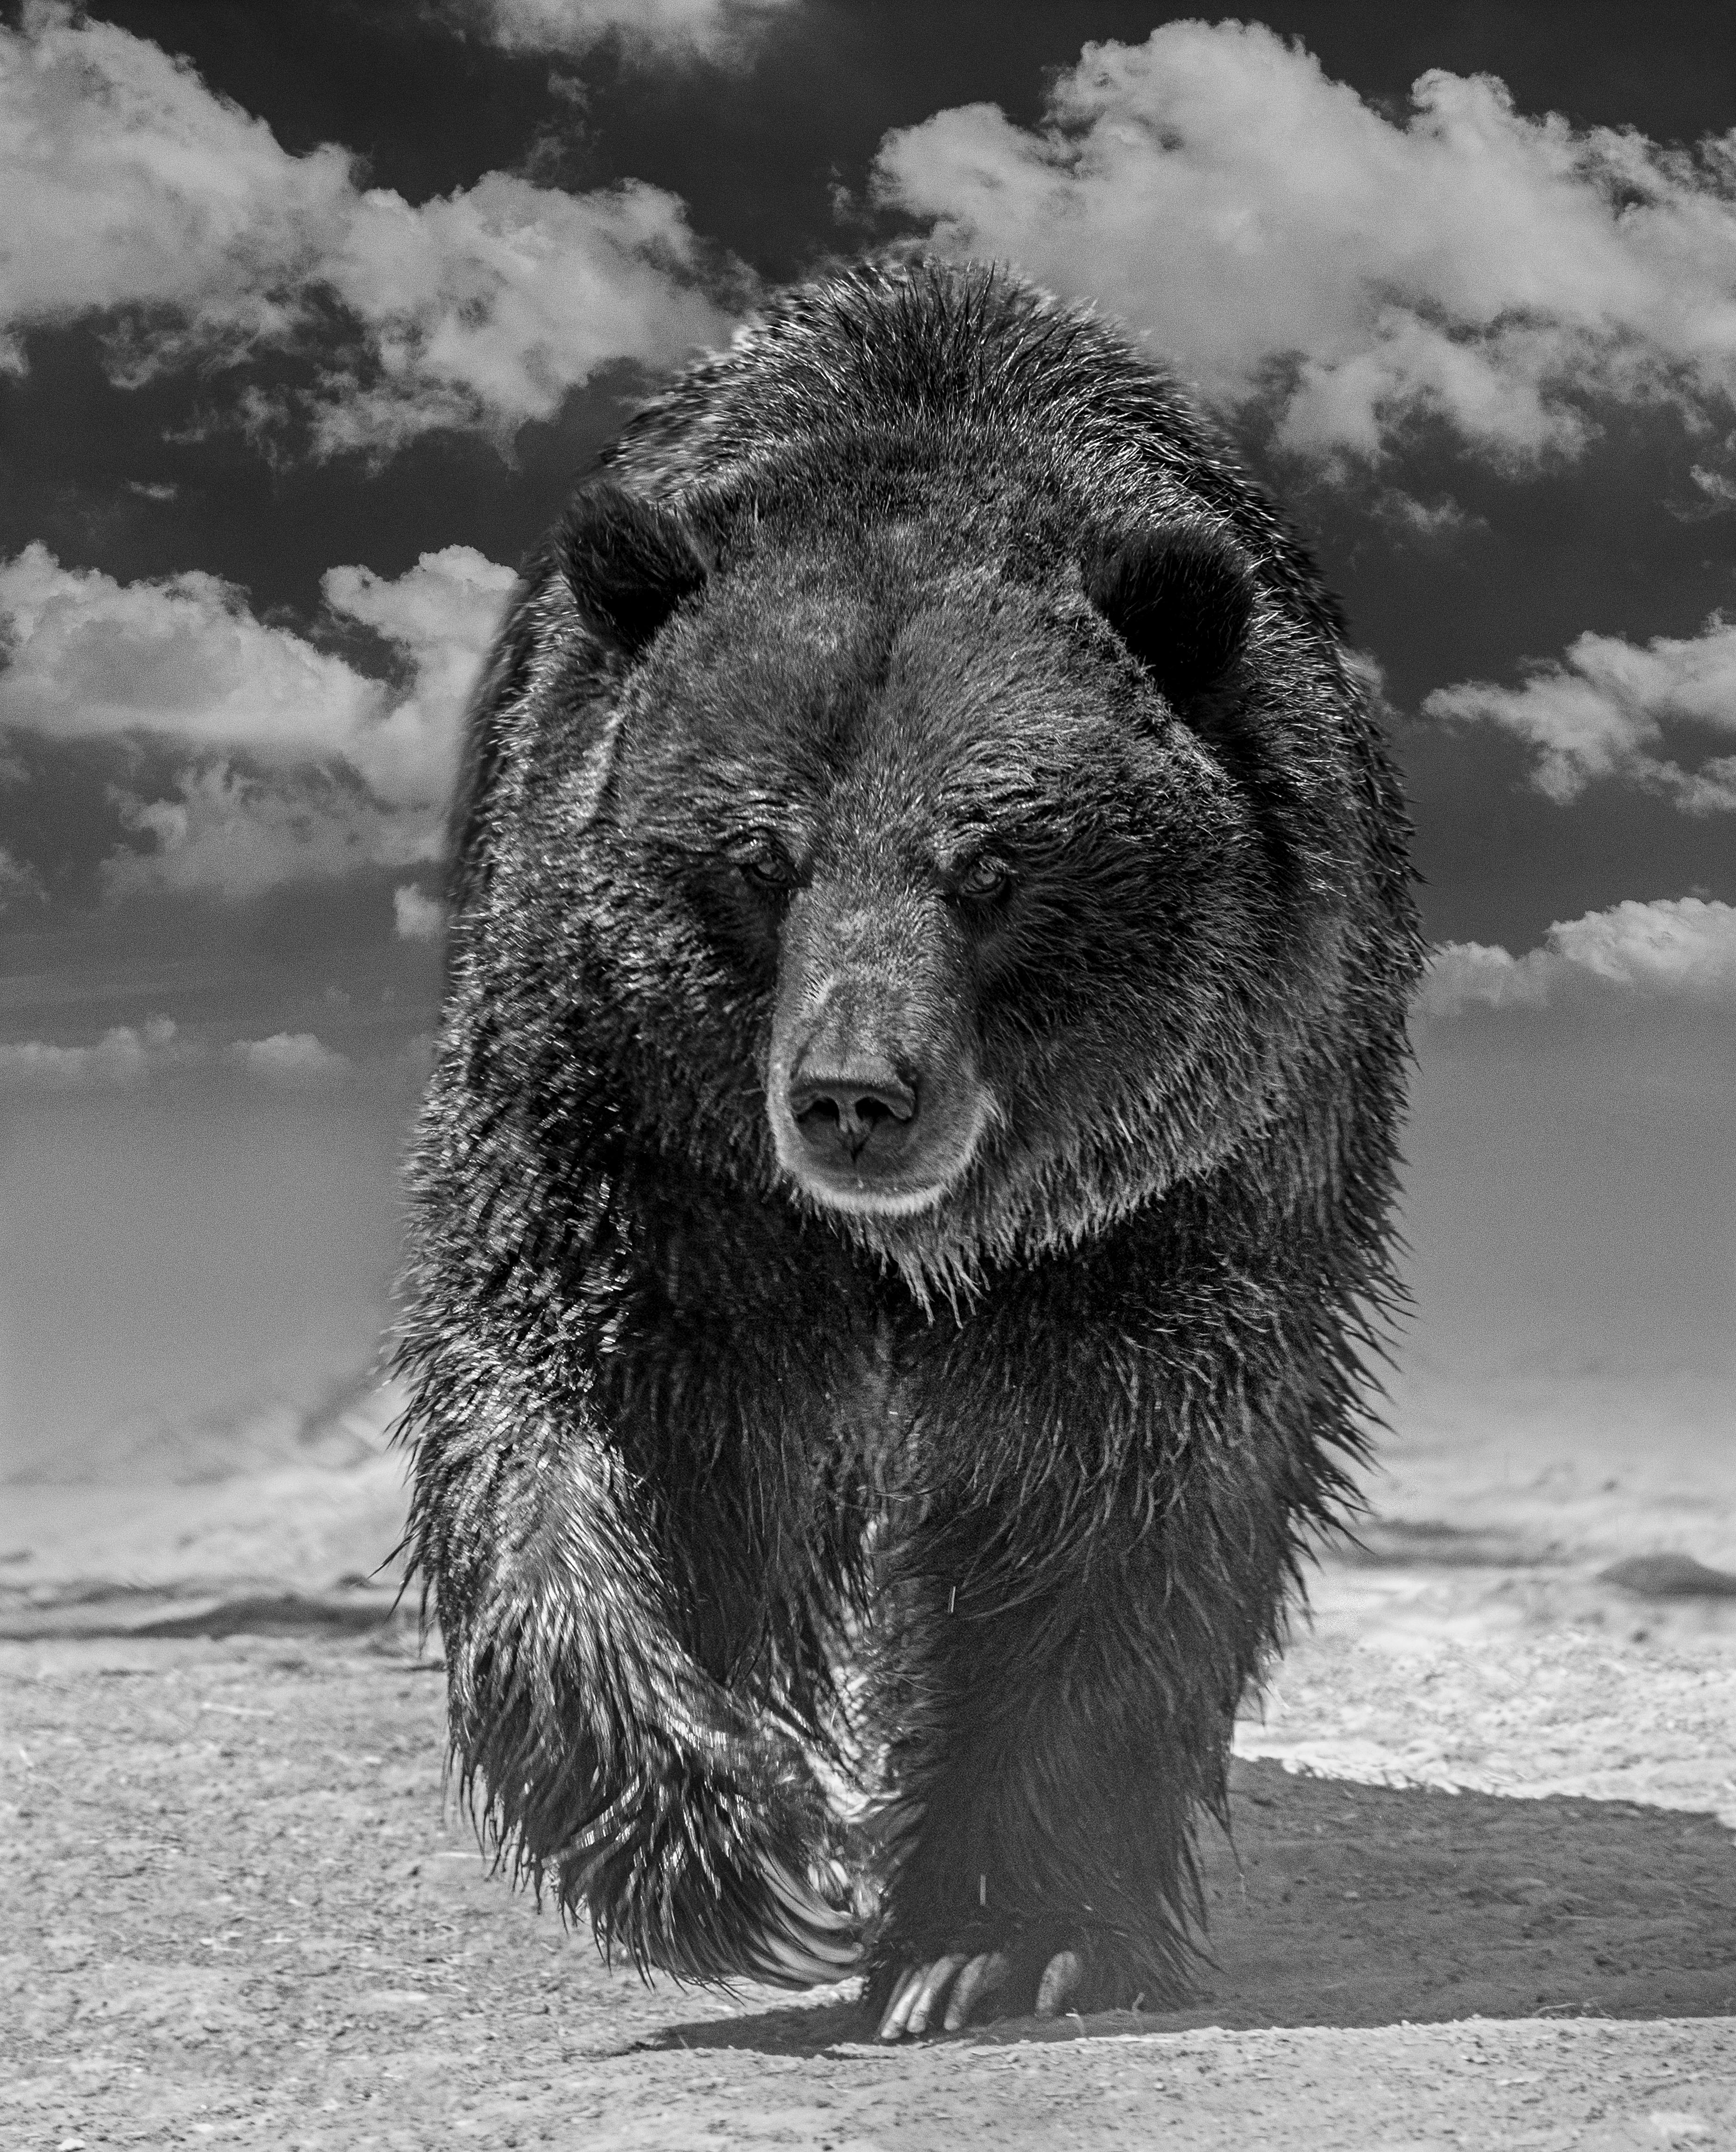 Shane Russeck Animal Print - "Grizzly Shores" 36x48 -  Black & White Photograph Grizzly Bear Unsigned print